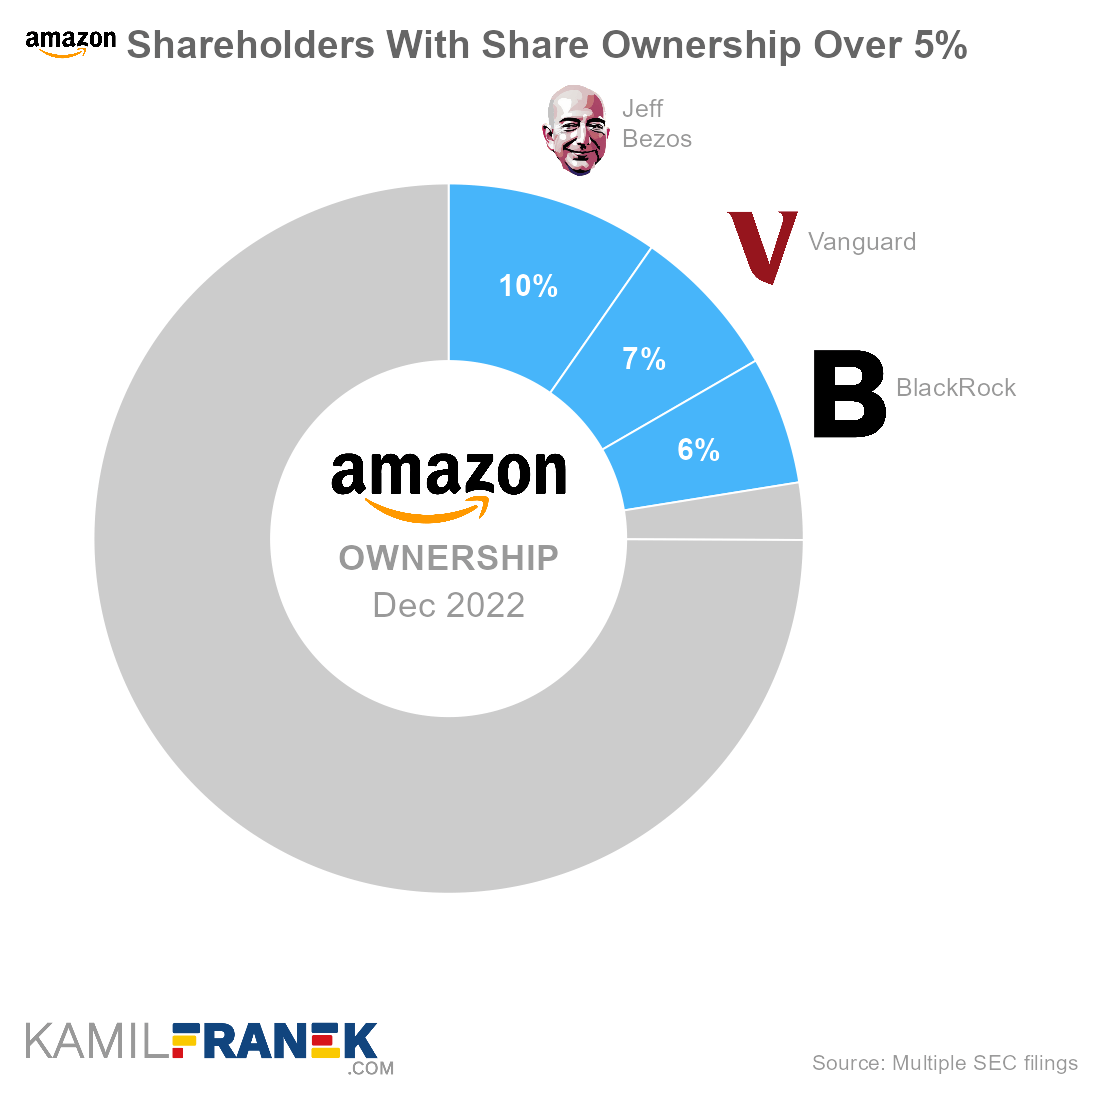 Amazon largest shareholders by share ownership and vote control (donut chart)